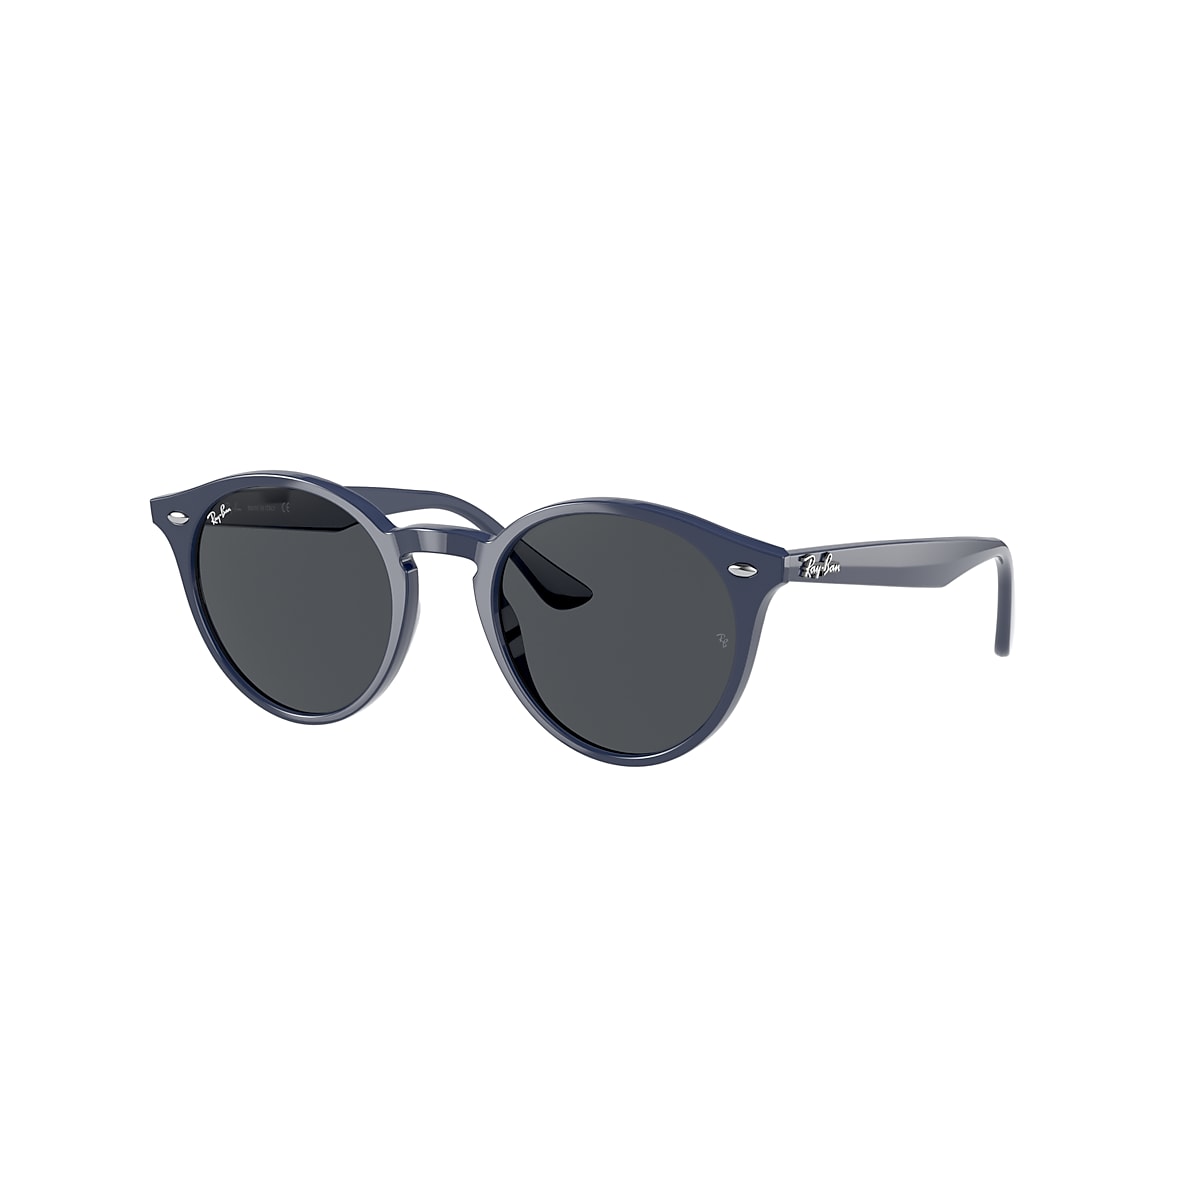 RB2180 Sunglasses in Blue and Dark Grey - RB2180F | Ray-Ban® US